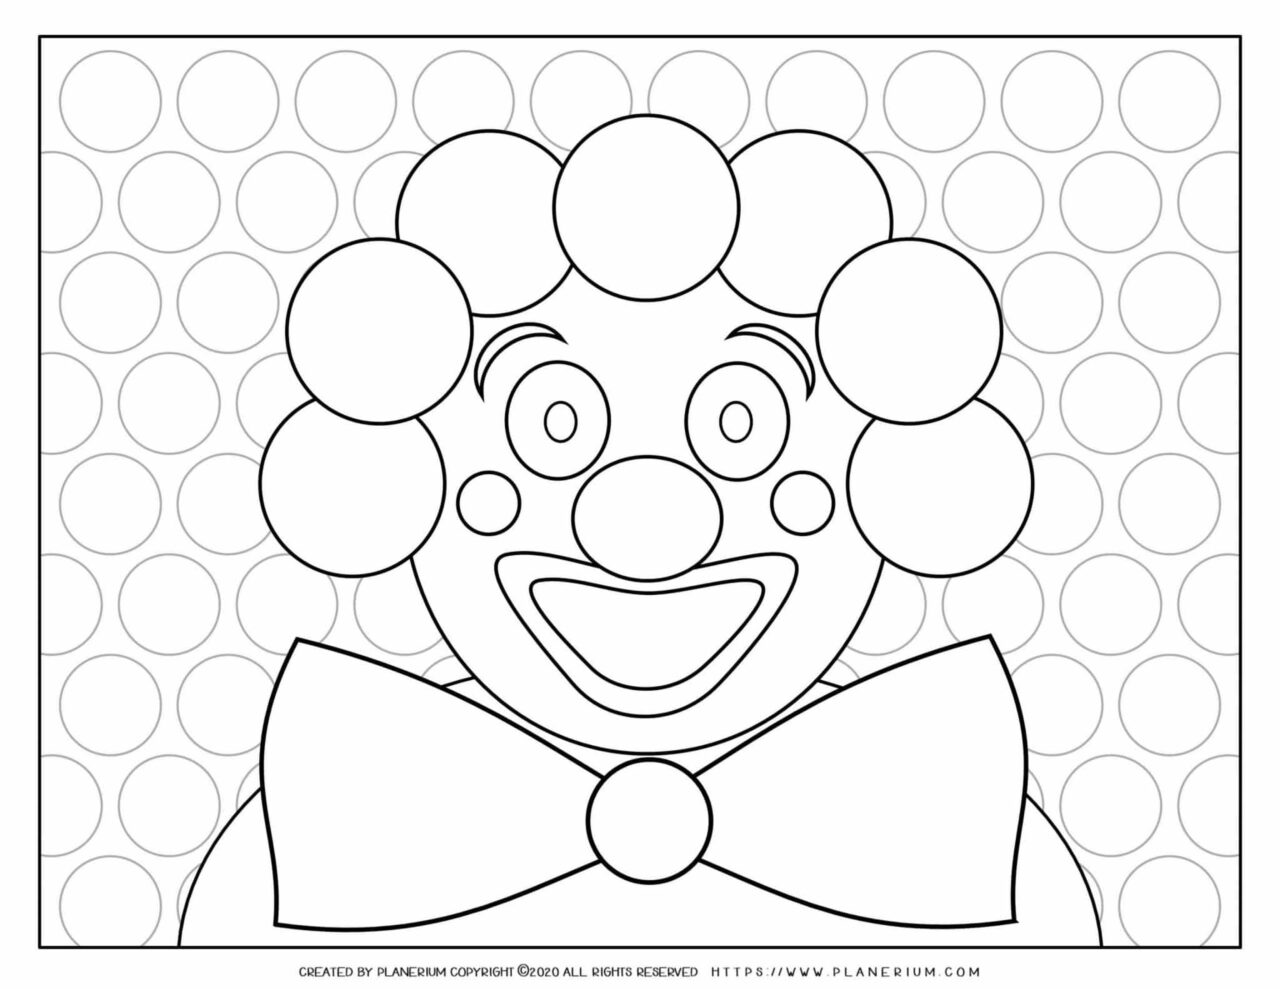 Carnival - Coloring Page Worksheet - Smiley Clown | Planerium